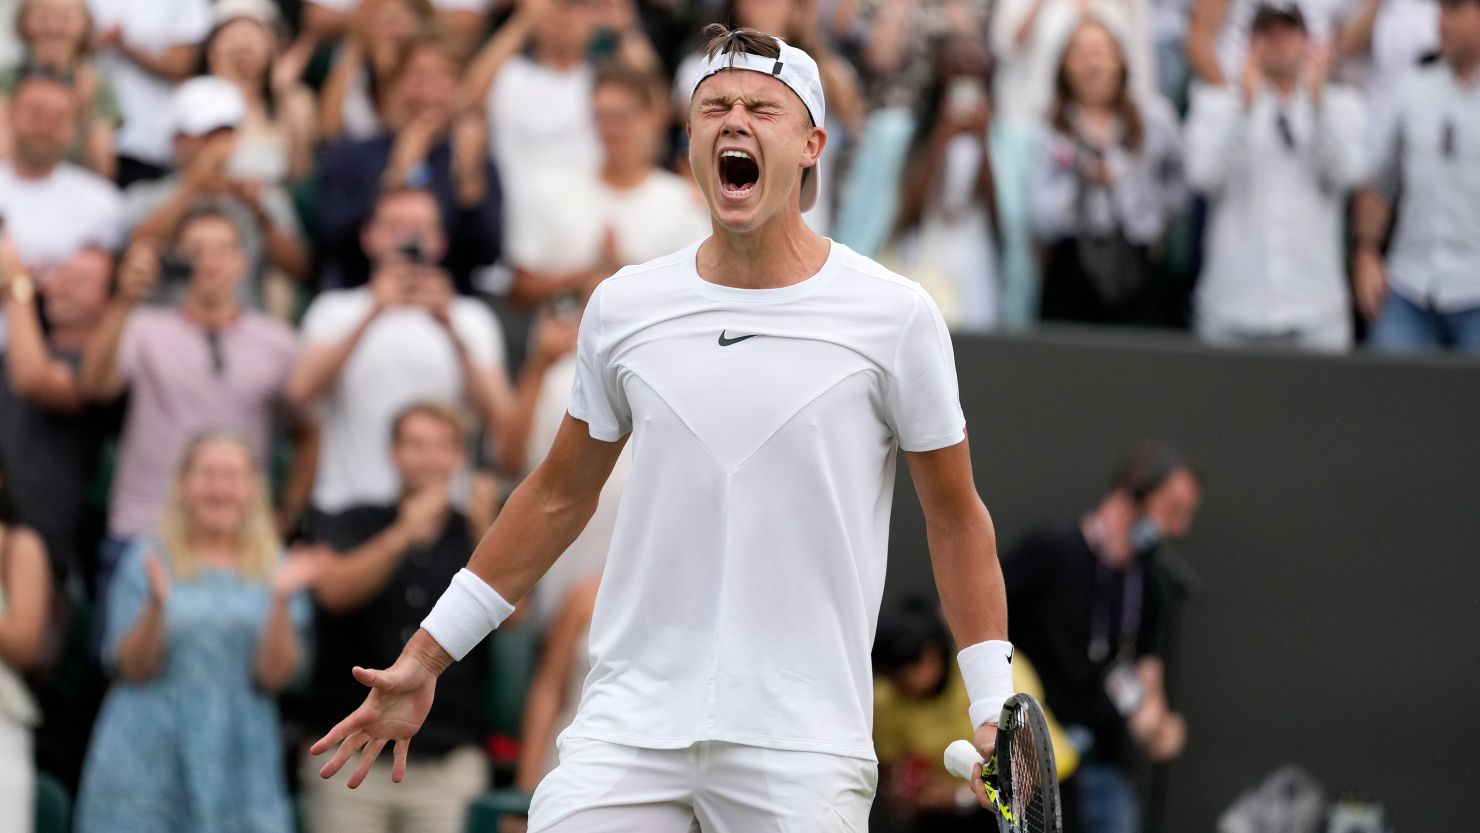 Denmark's Holger Rune celebrates after beating Spain's Alejandro Davidovich Fokina in a men's singles match on day six of the Wimbledon tennis championships in London, Saturday, July 8, 2023.